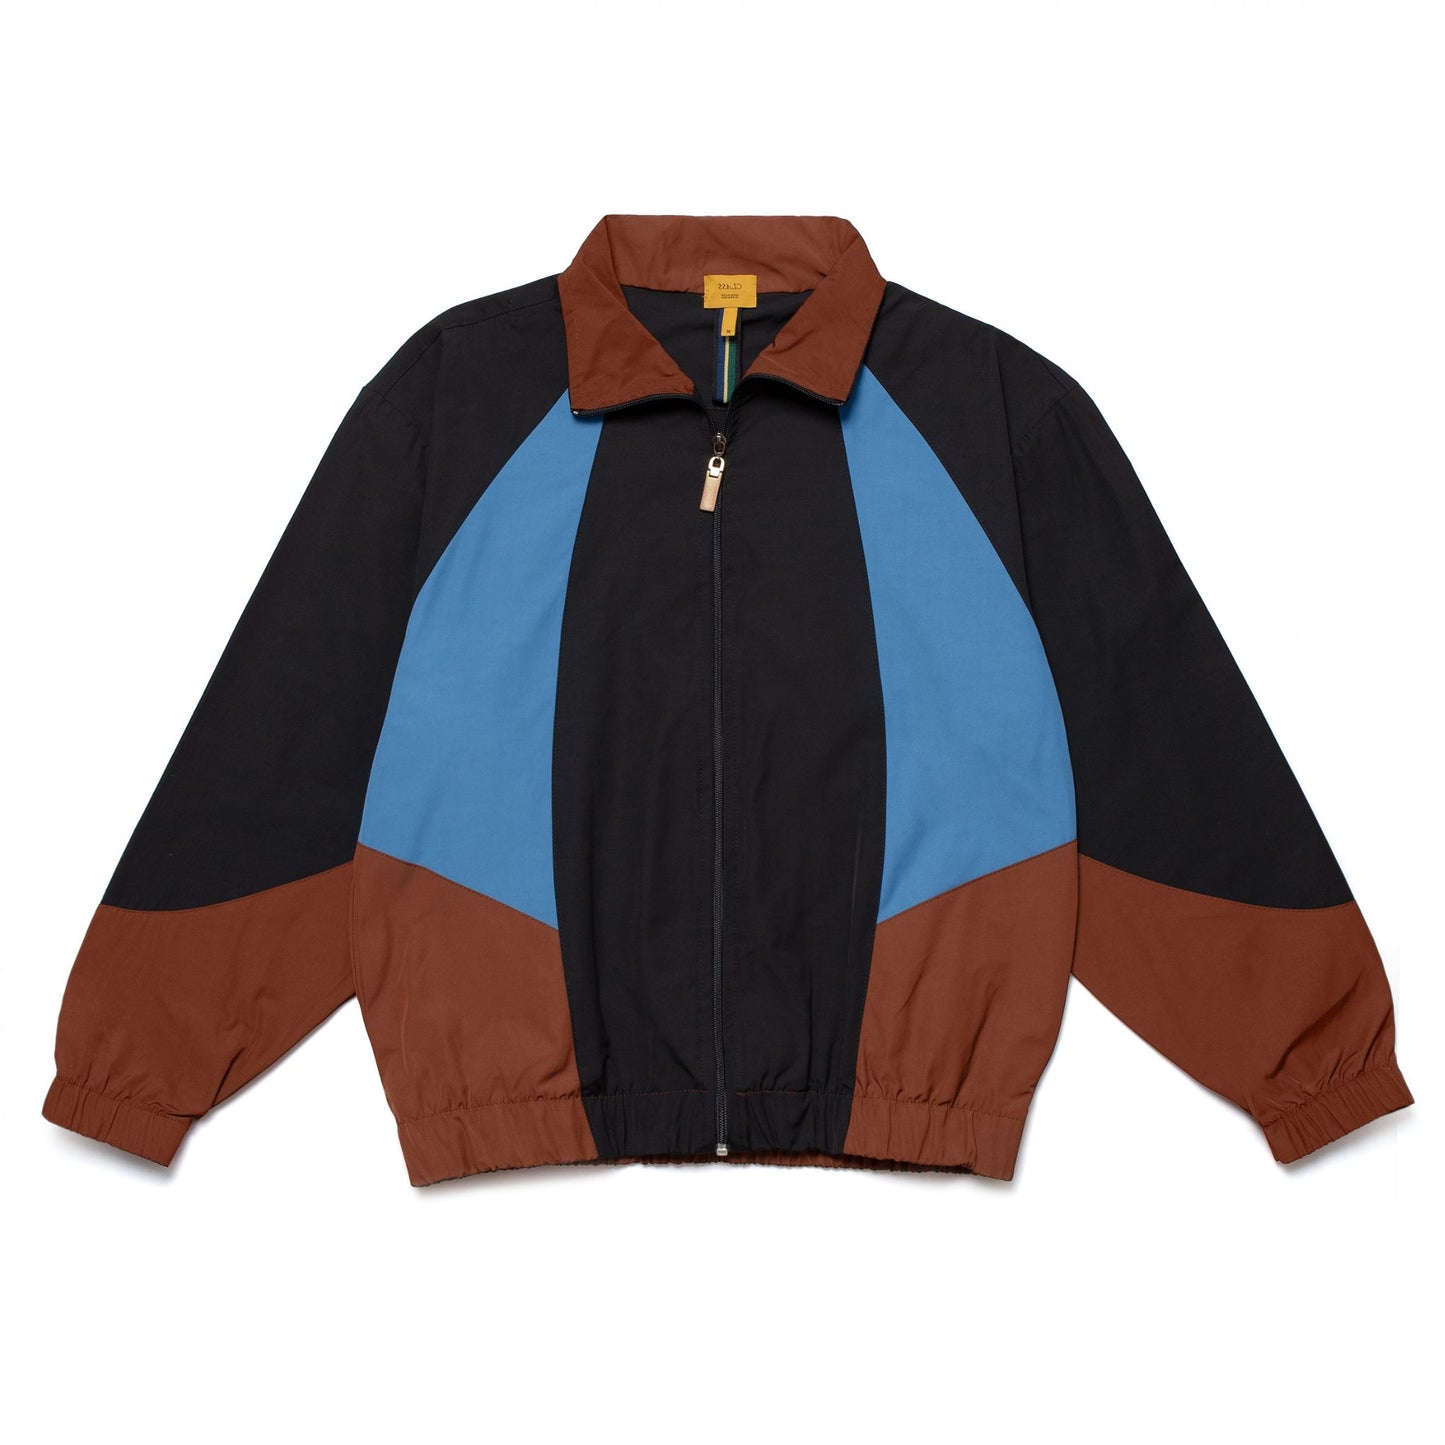 CLASS - Jacket Powell "Black&Brown" - THE GAME